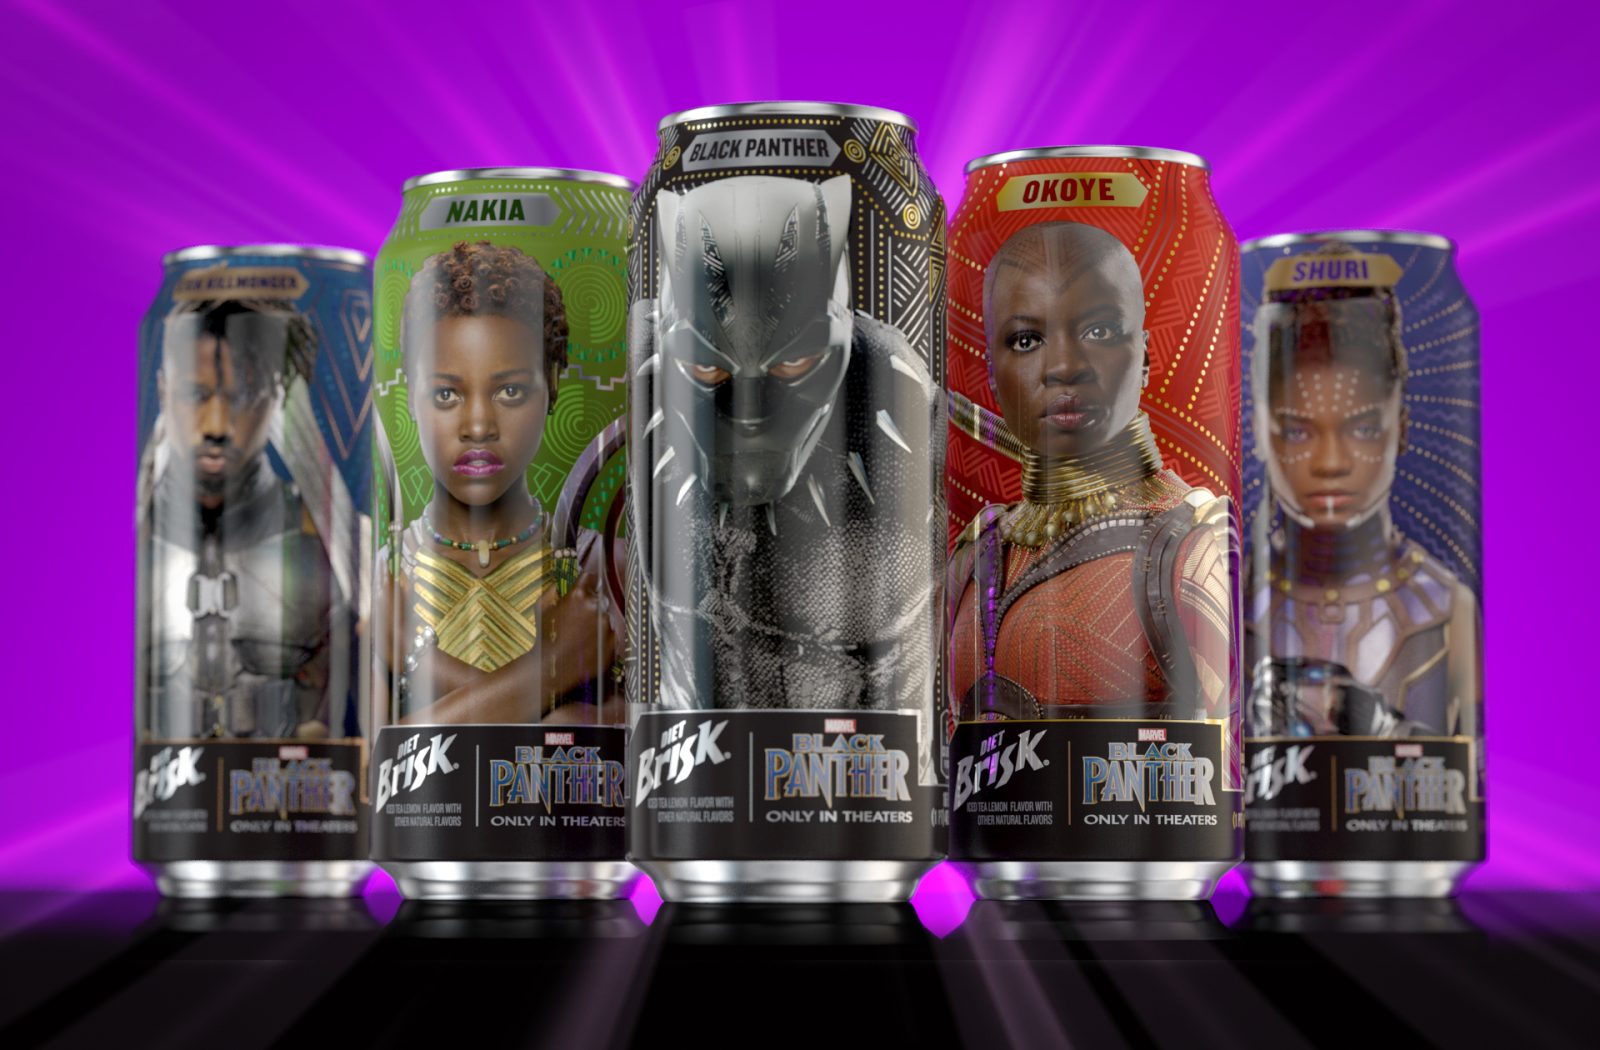 Hero image of a full product line for a limited edition brisk collaboration with Marvel Studio’s Black Panther, showcasing Innovative print technologies and best in class commercial printing.